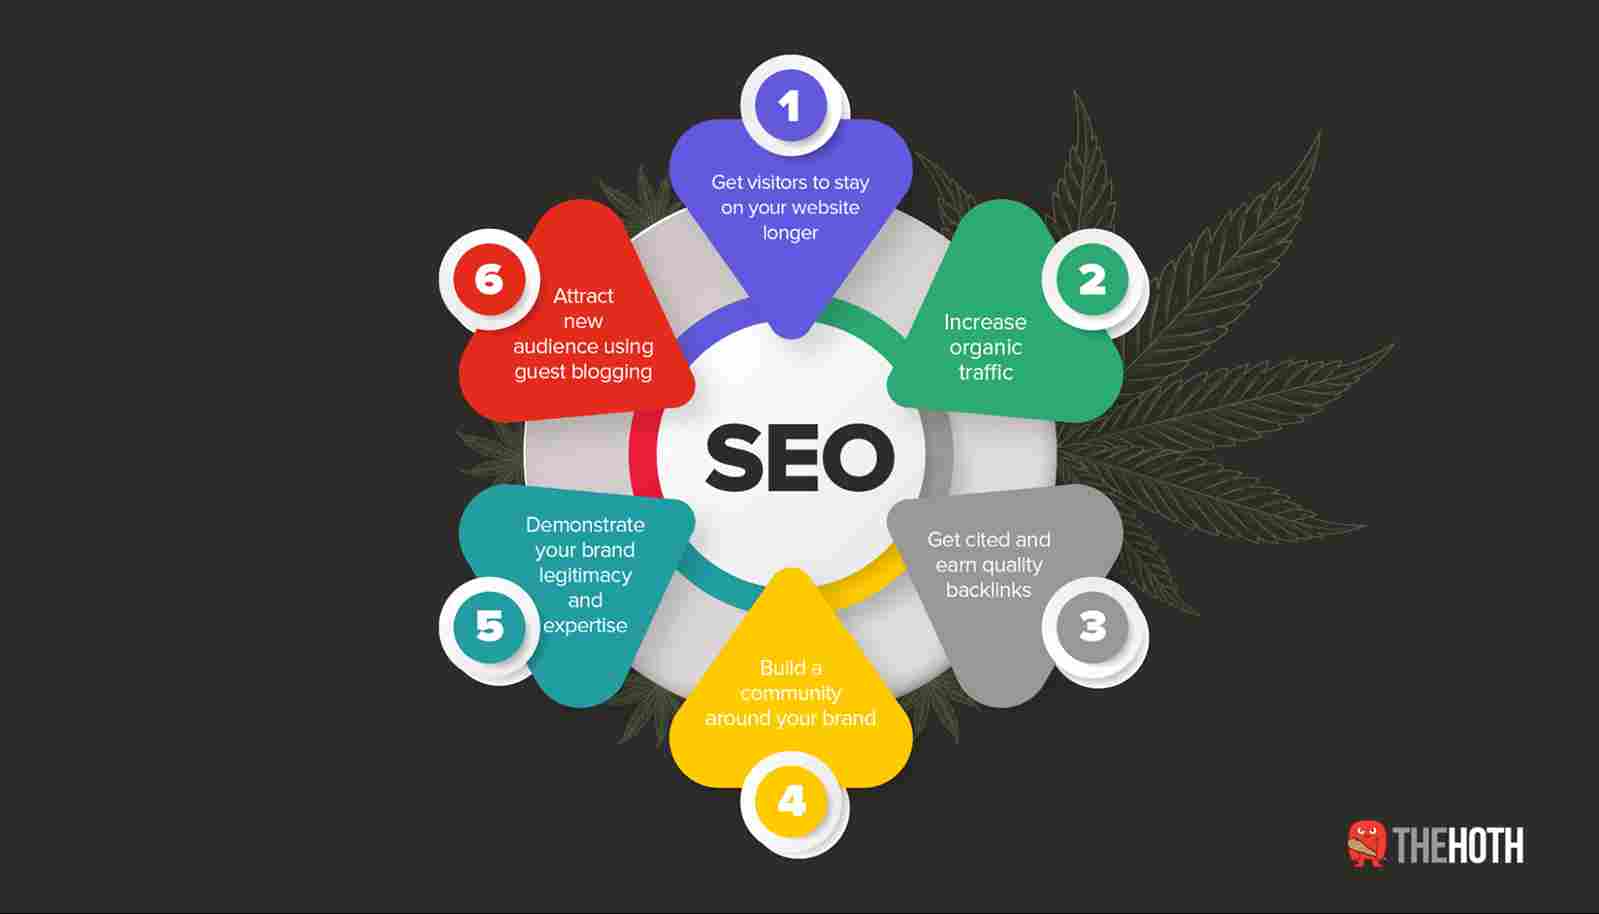 CBD-related content for SEO